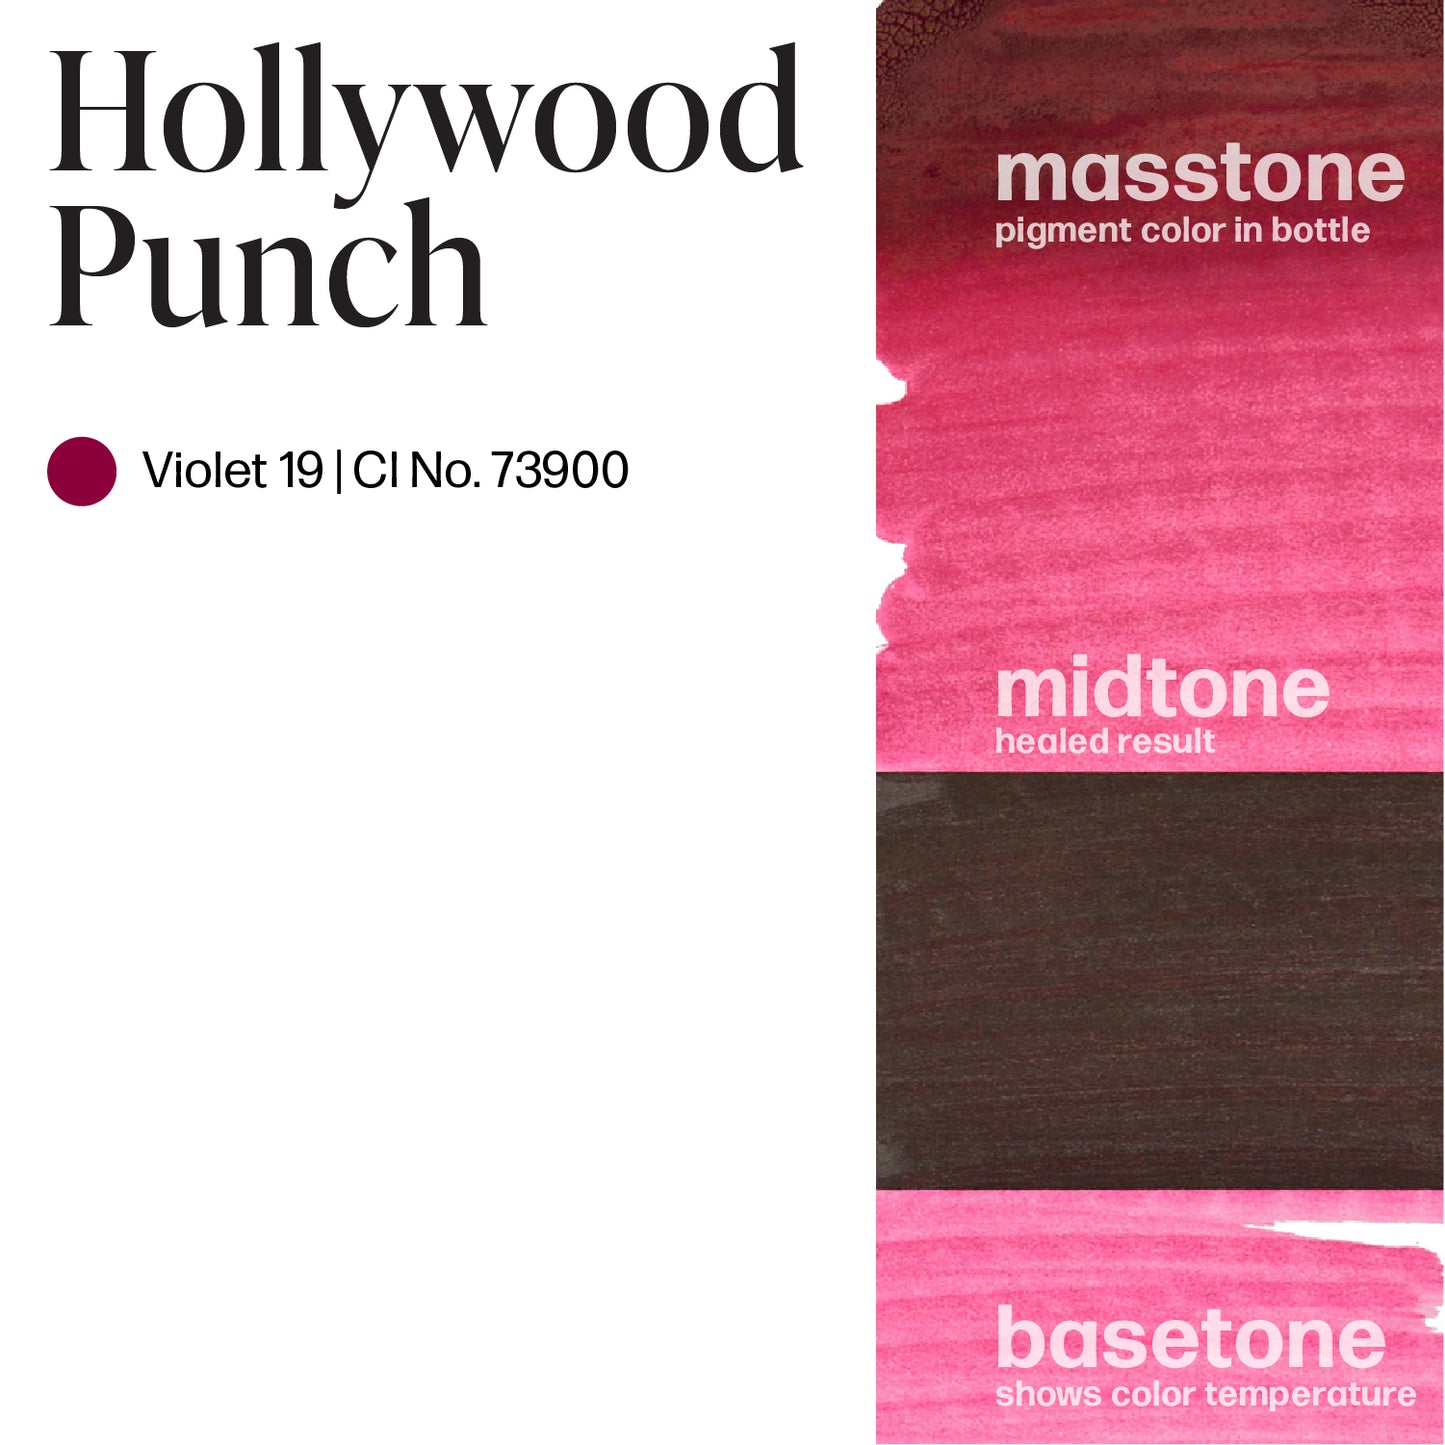 Hollywood Punch